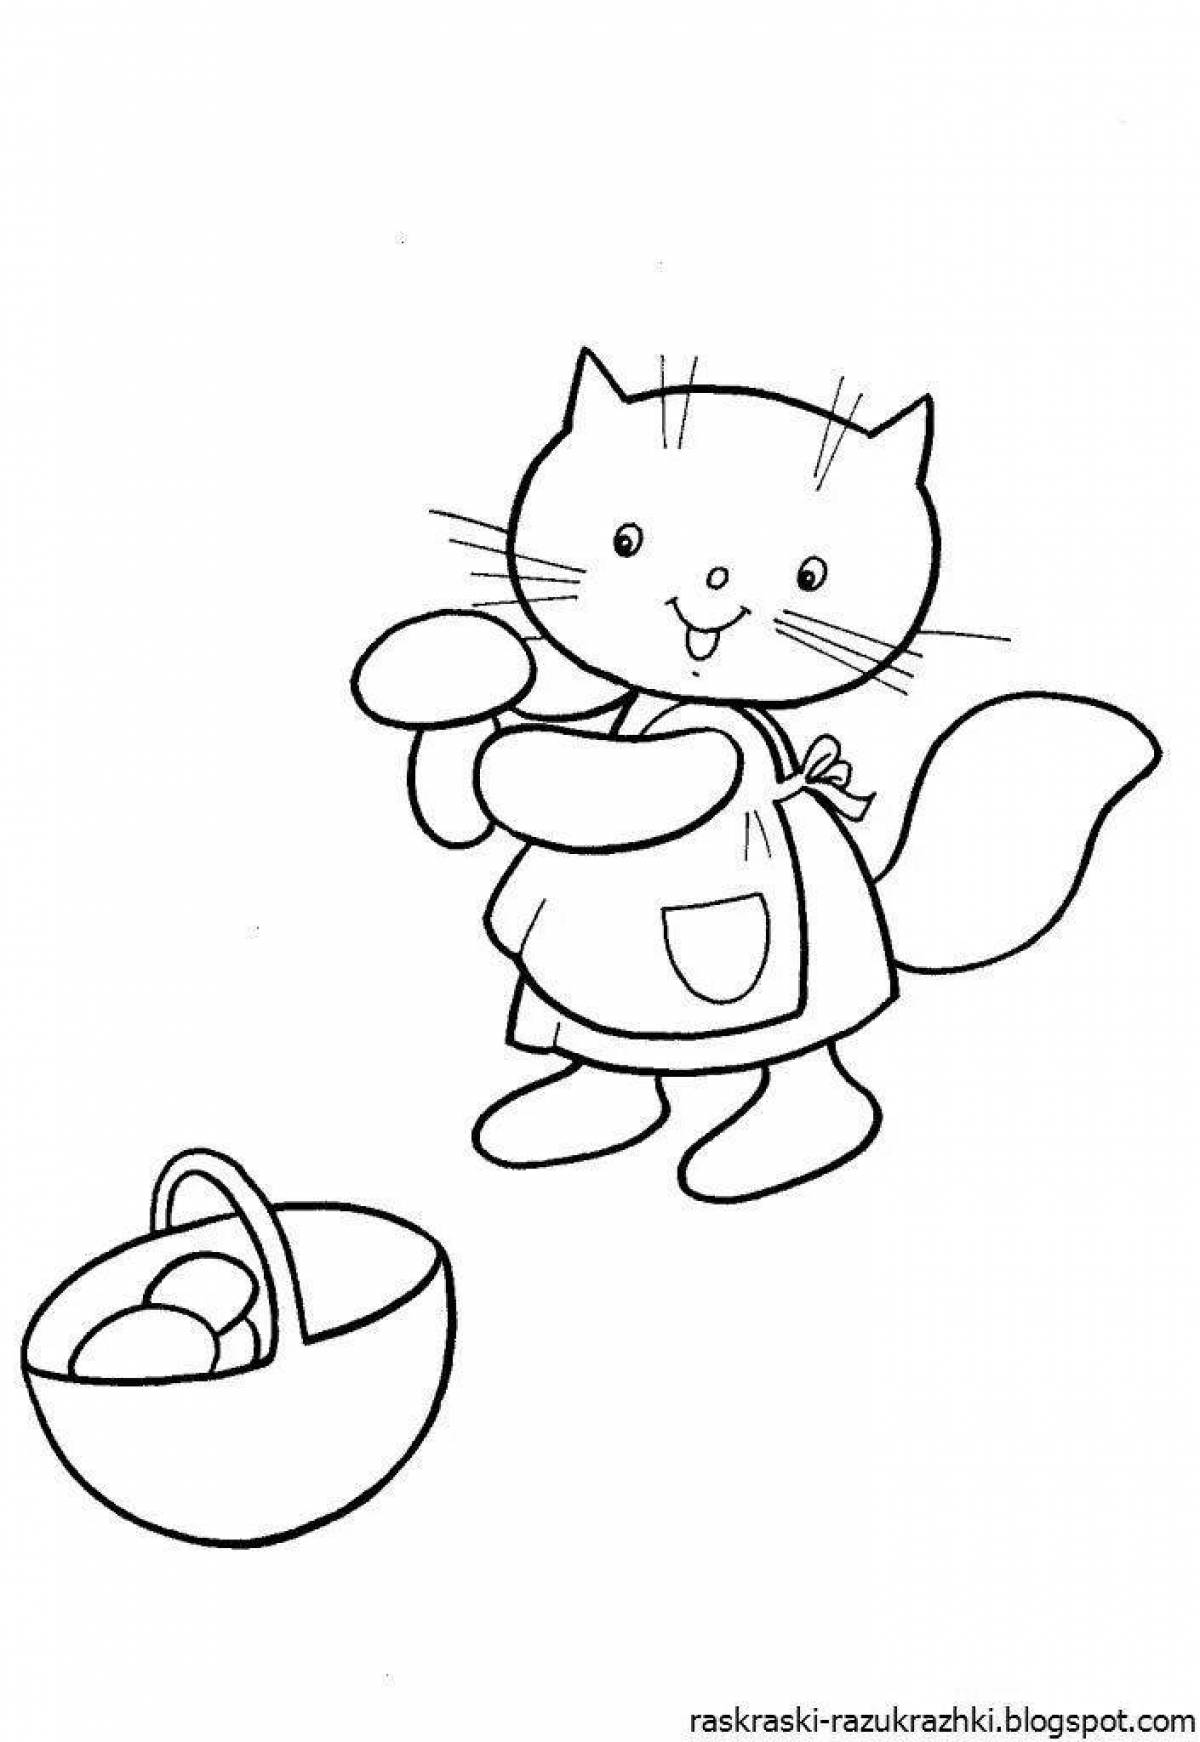 Fun coloring book of cats for kids